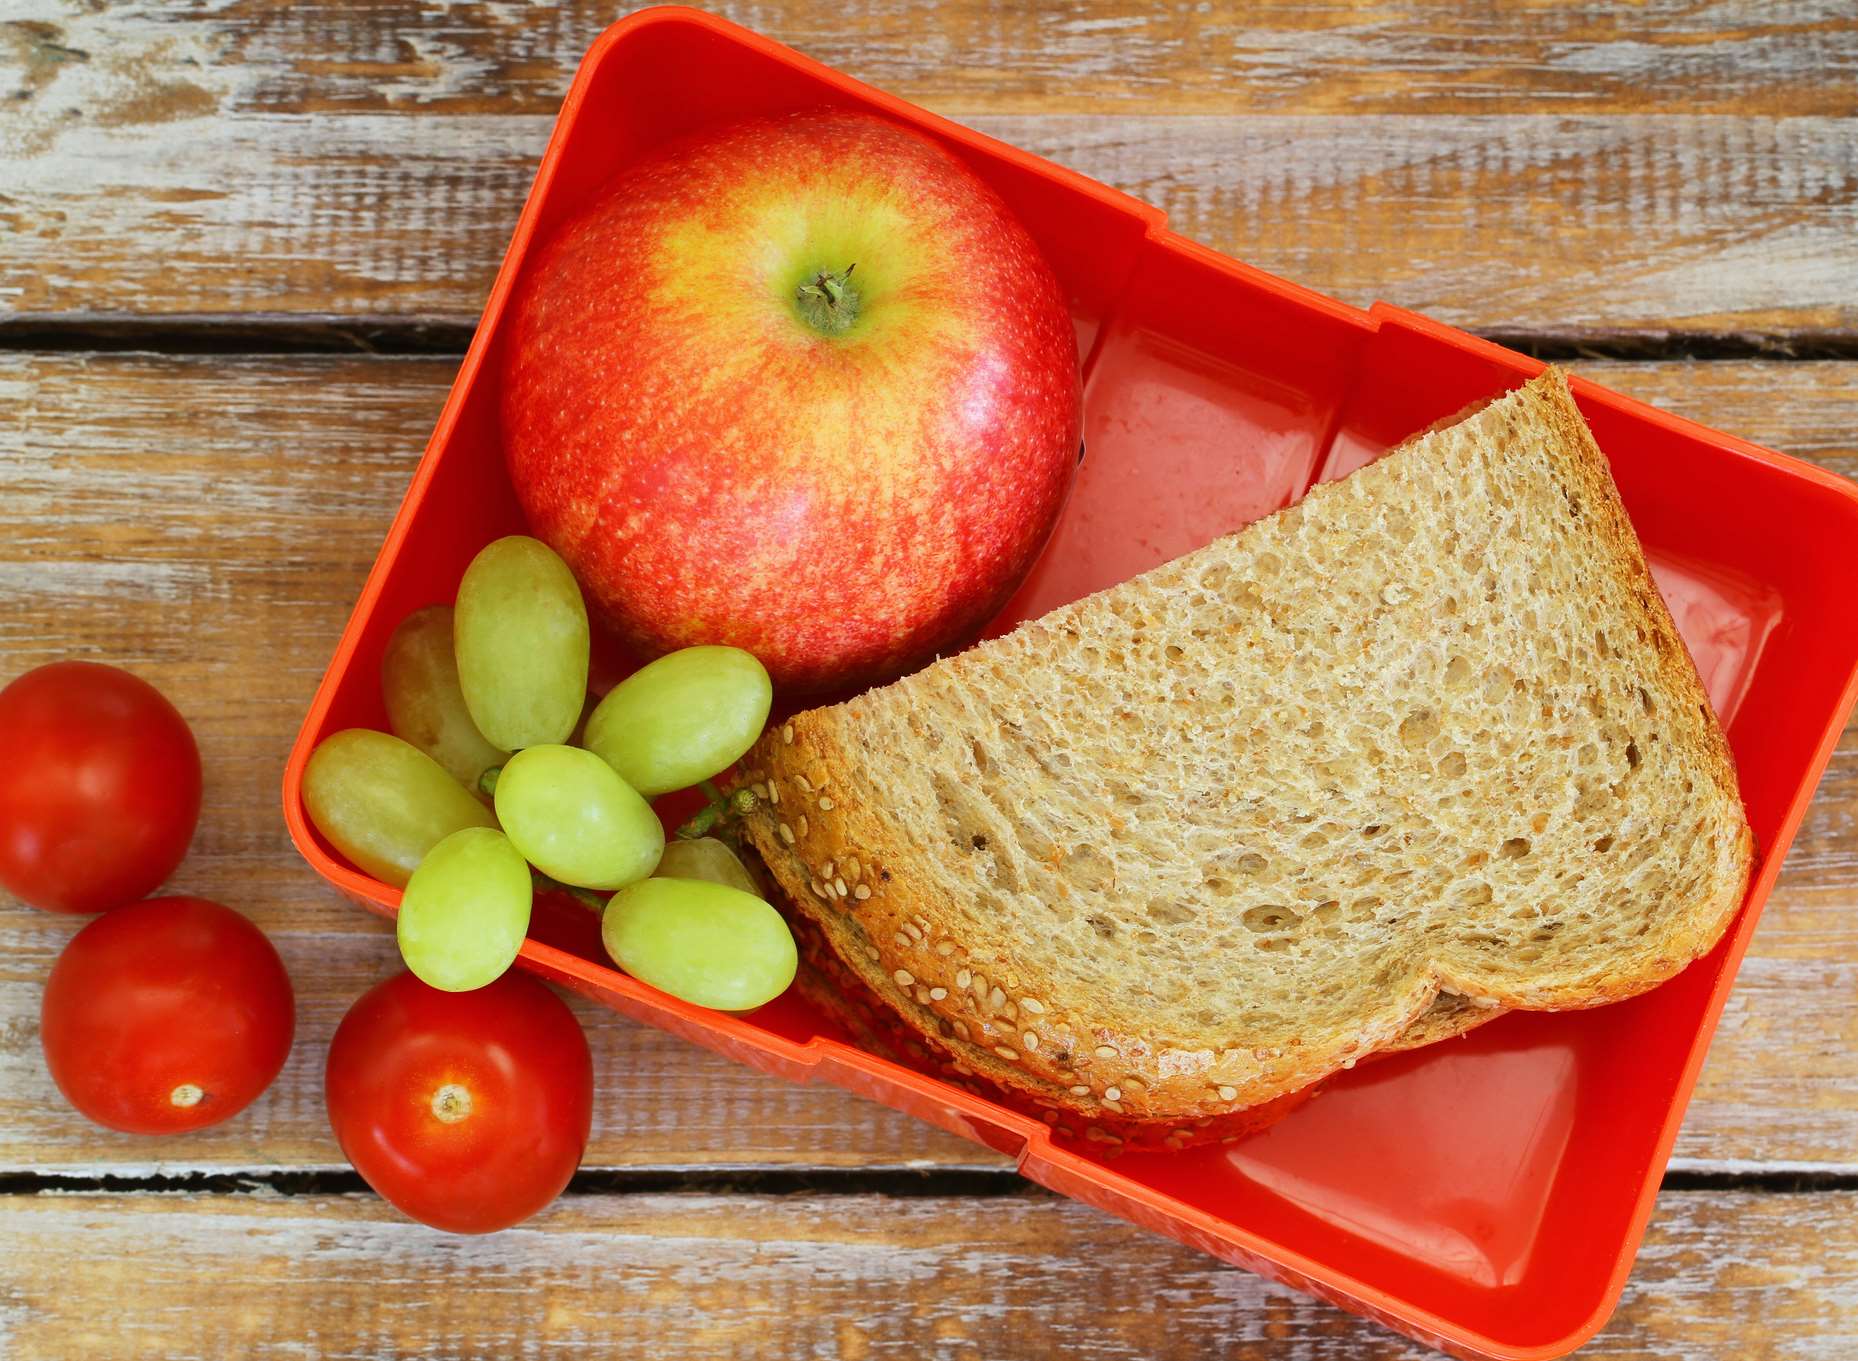 The school's asking parents to pack healthy lunches. Picture: Getty Images